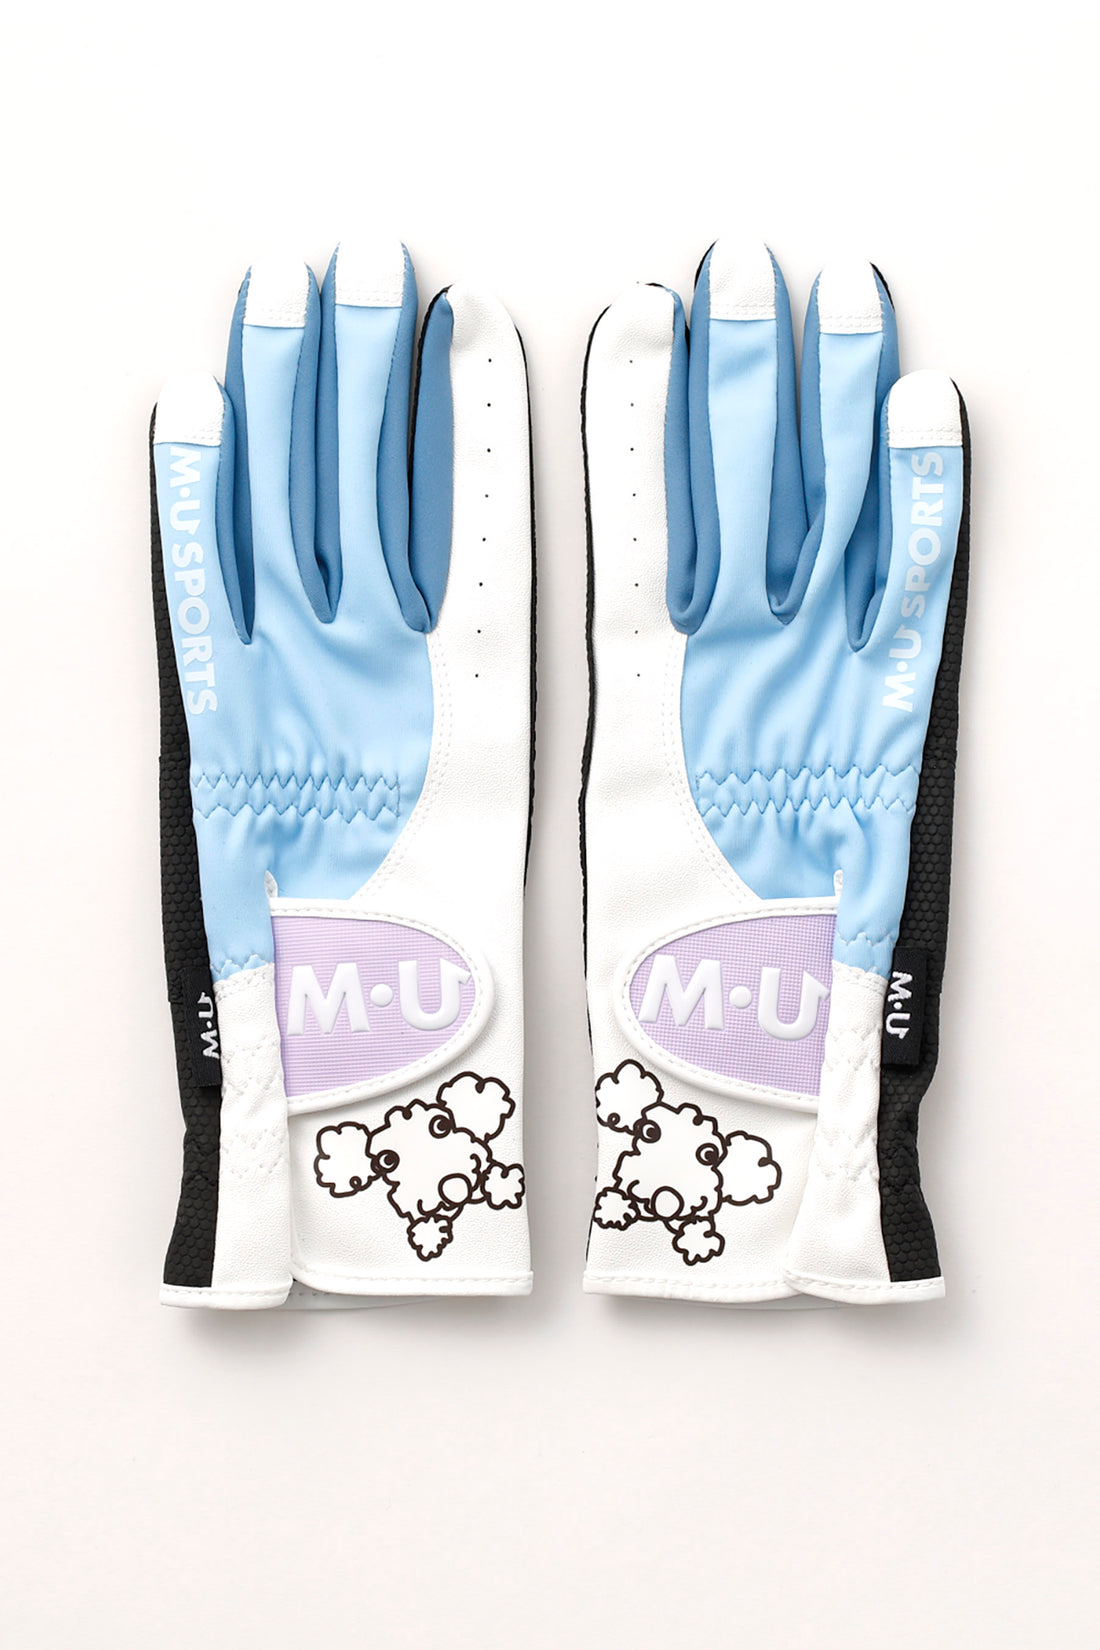 Multi-nuance color two-handed gloves (703Q1802)